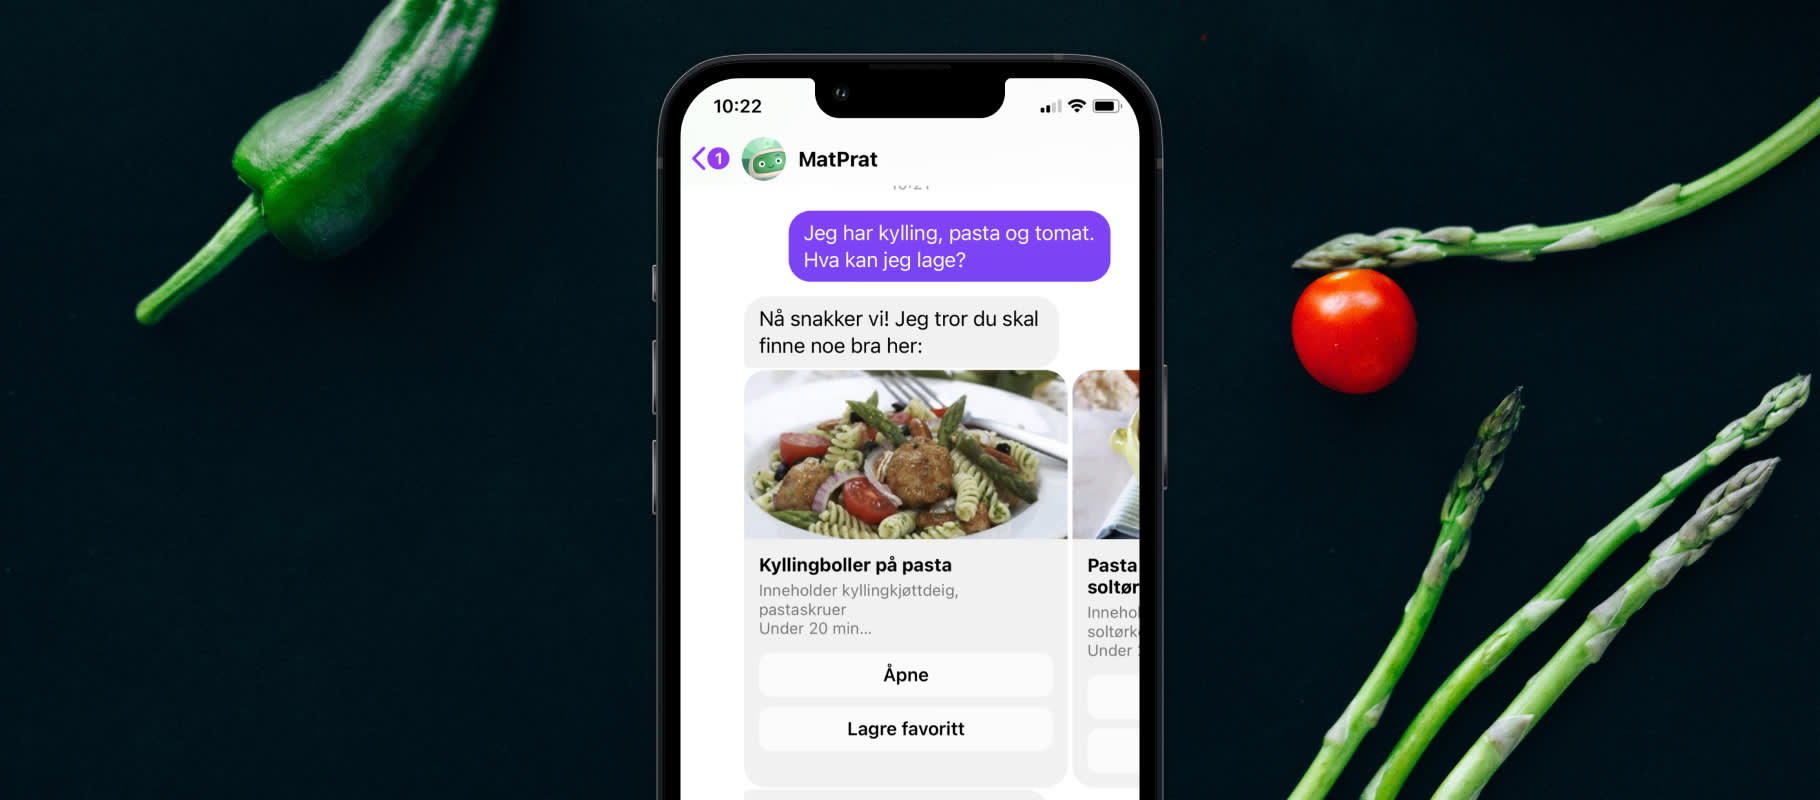 MatPrat website on mobile – the screen with messages.